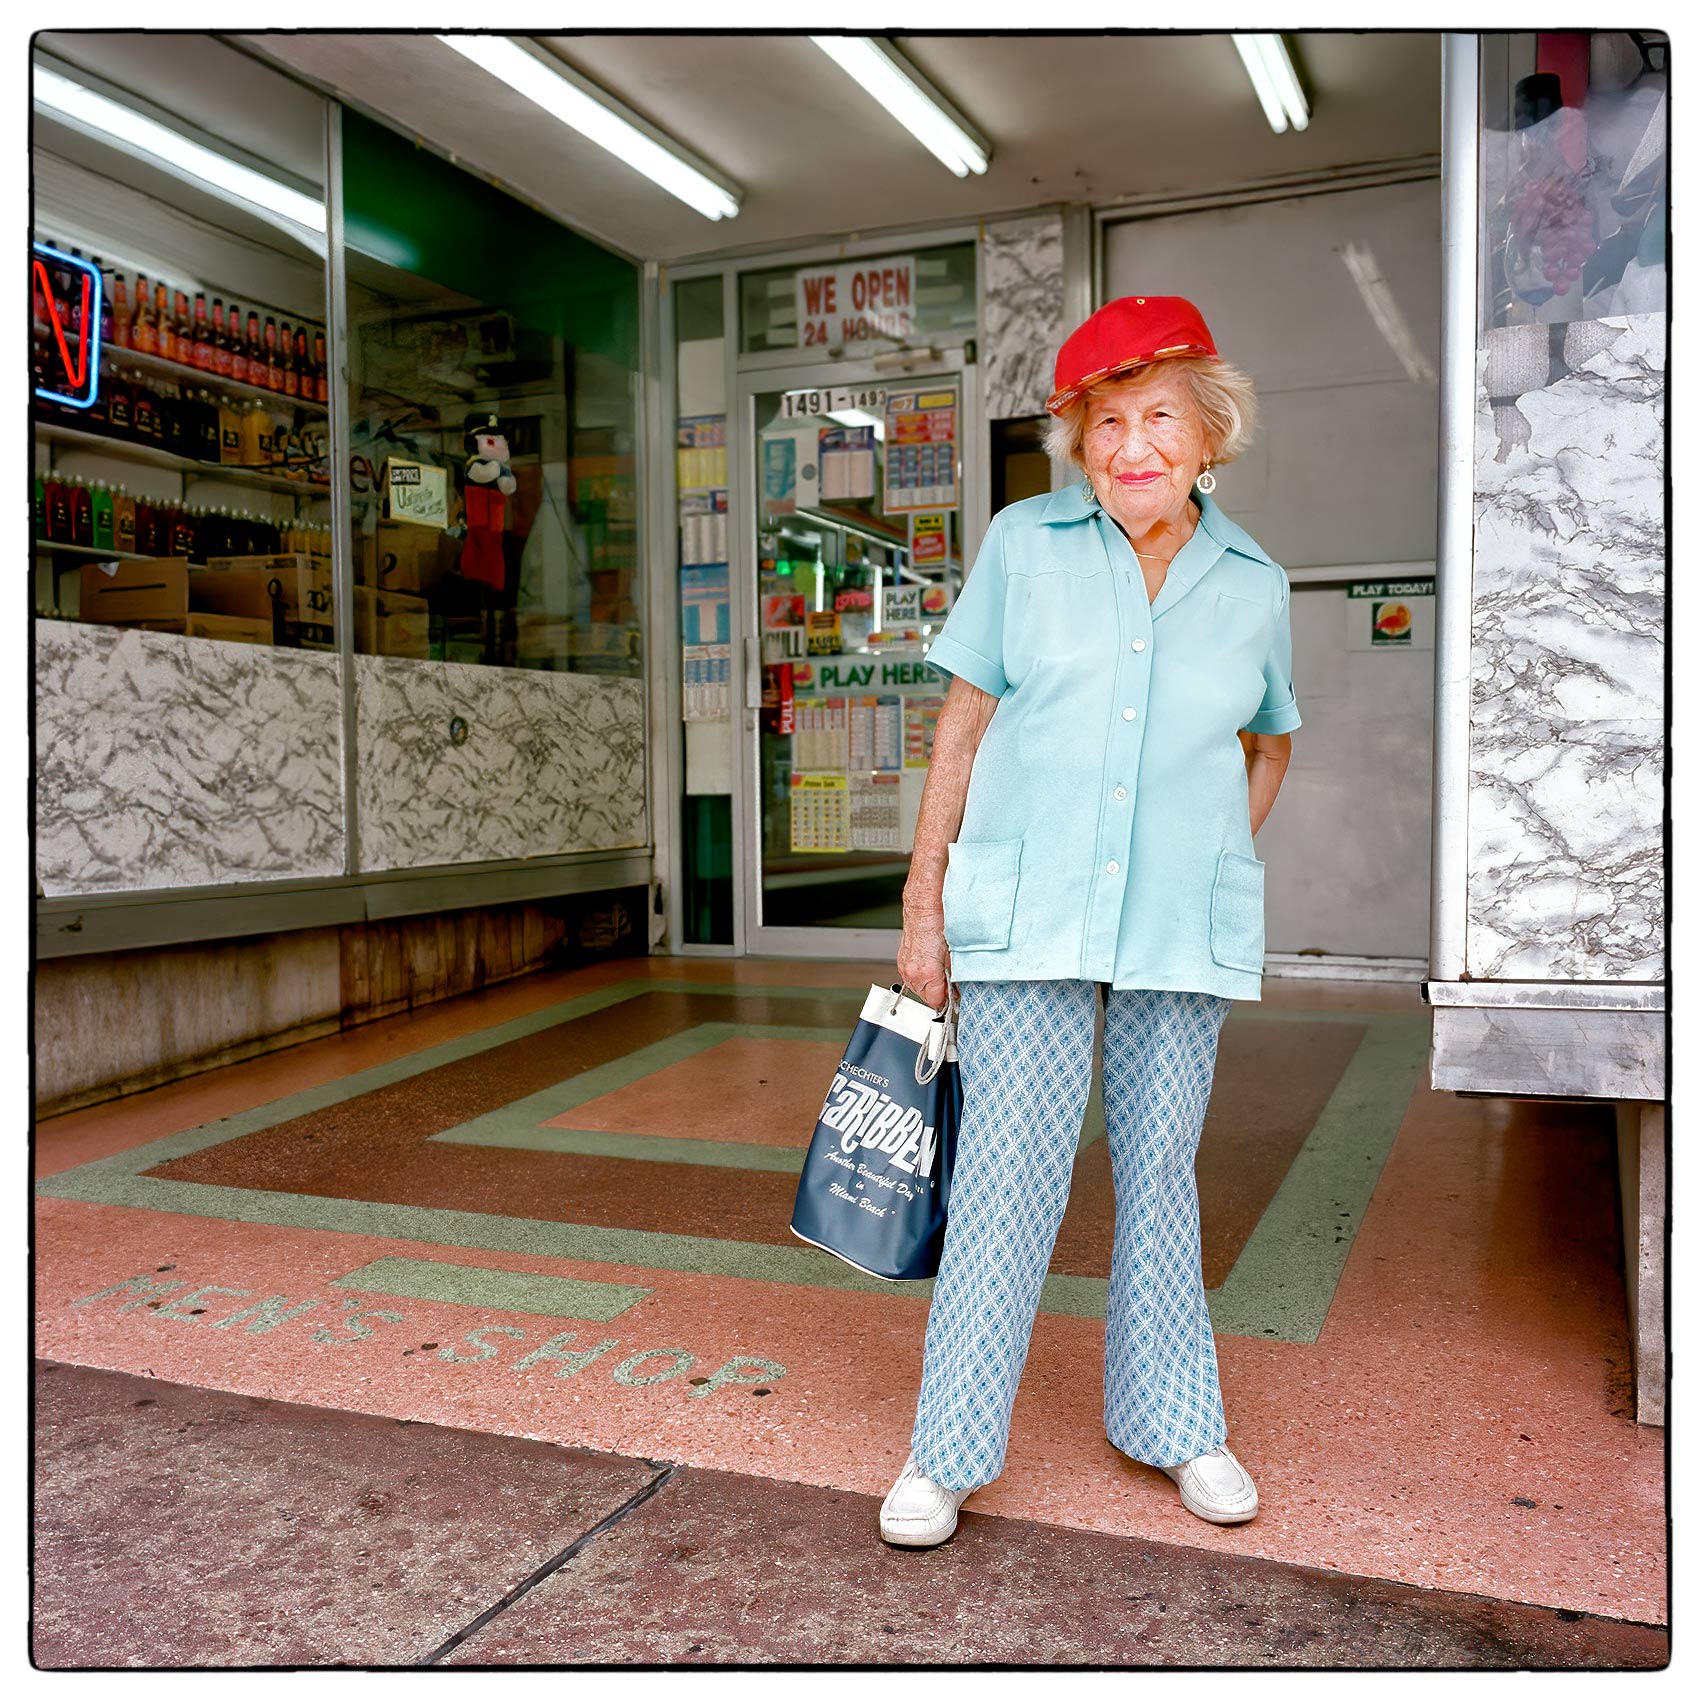 a-retired-woman-poses-for-a-photo-outside-a-convenience-store-near-her-condominium-in-miami-florida